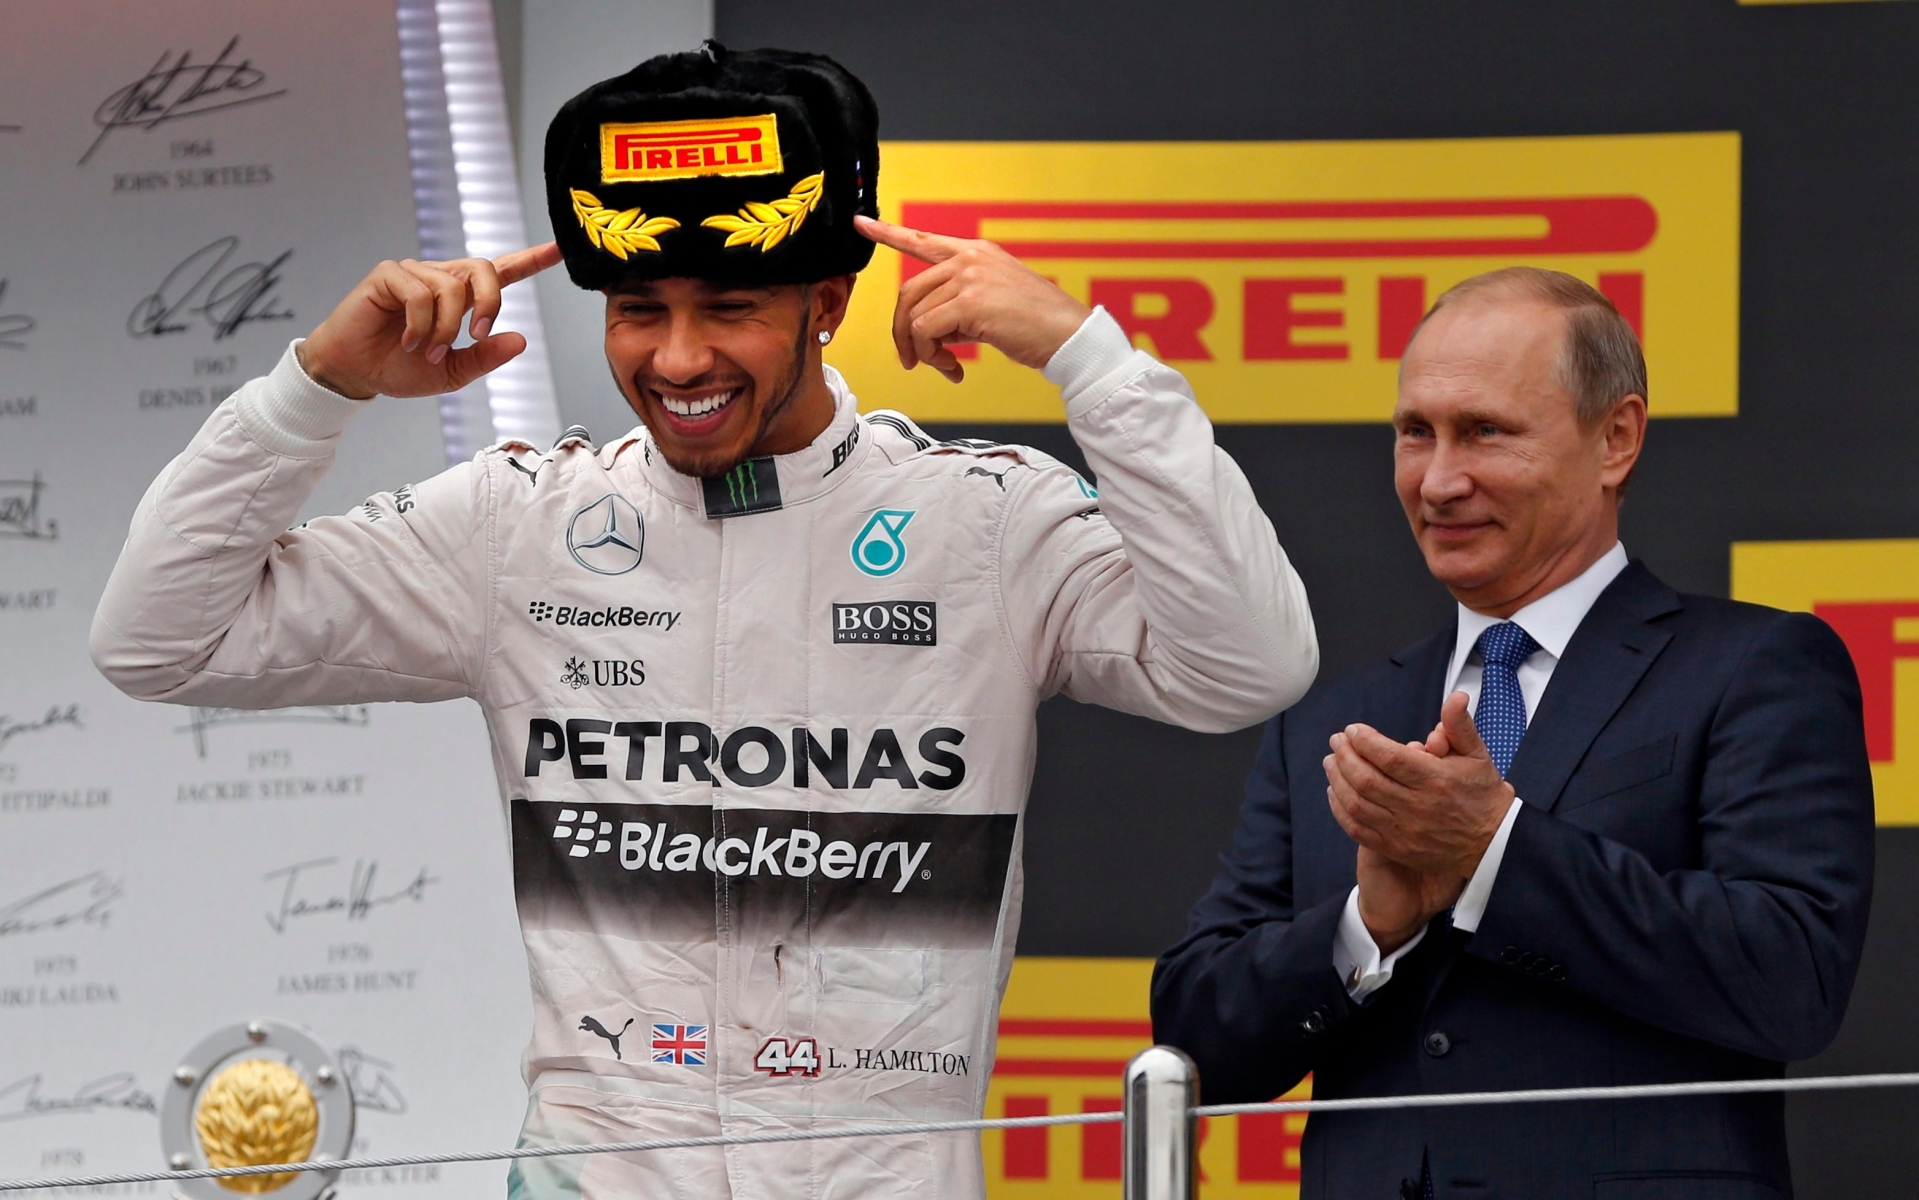 epa04973455 British Formula One driver Lewis Hamilton (L) of Mercedes AMG GP celebrates on the podium as Russian President Vlaimir Putin (R) applauds after winning the 2015 Formula One Grand Prix of Russia at the Sochi Autodrom circuit, in Sochi, Russia, 11 October 2015.  EPA/YURI KOCHETKOV RUSSIA FORMULA ONE GRAND PRIX